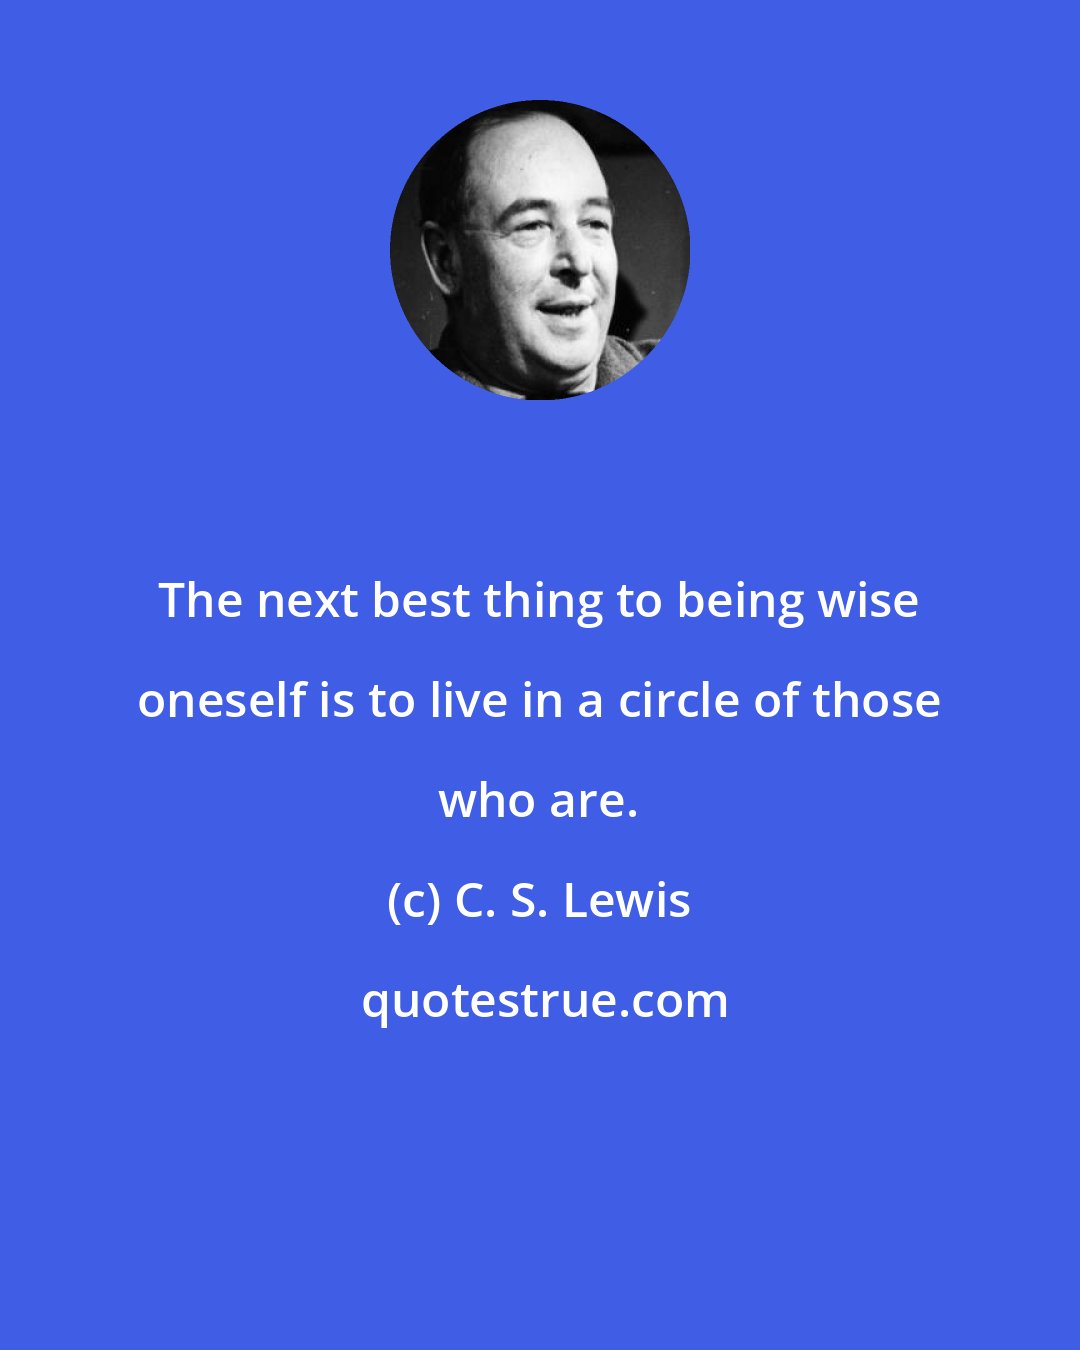 C. S. Lewis: The next best thing to being wise oneself is to live in a circle of those who are.